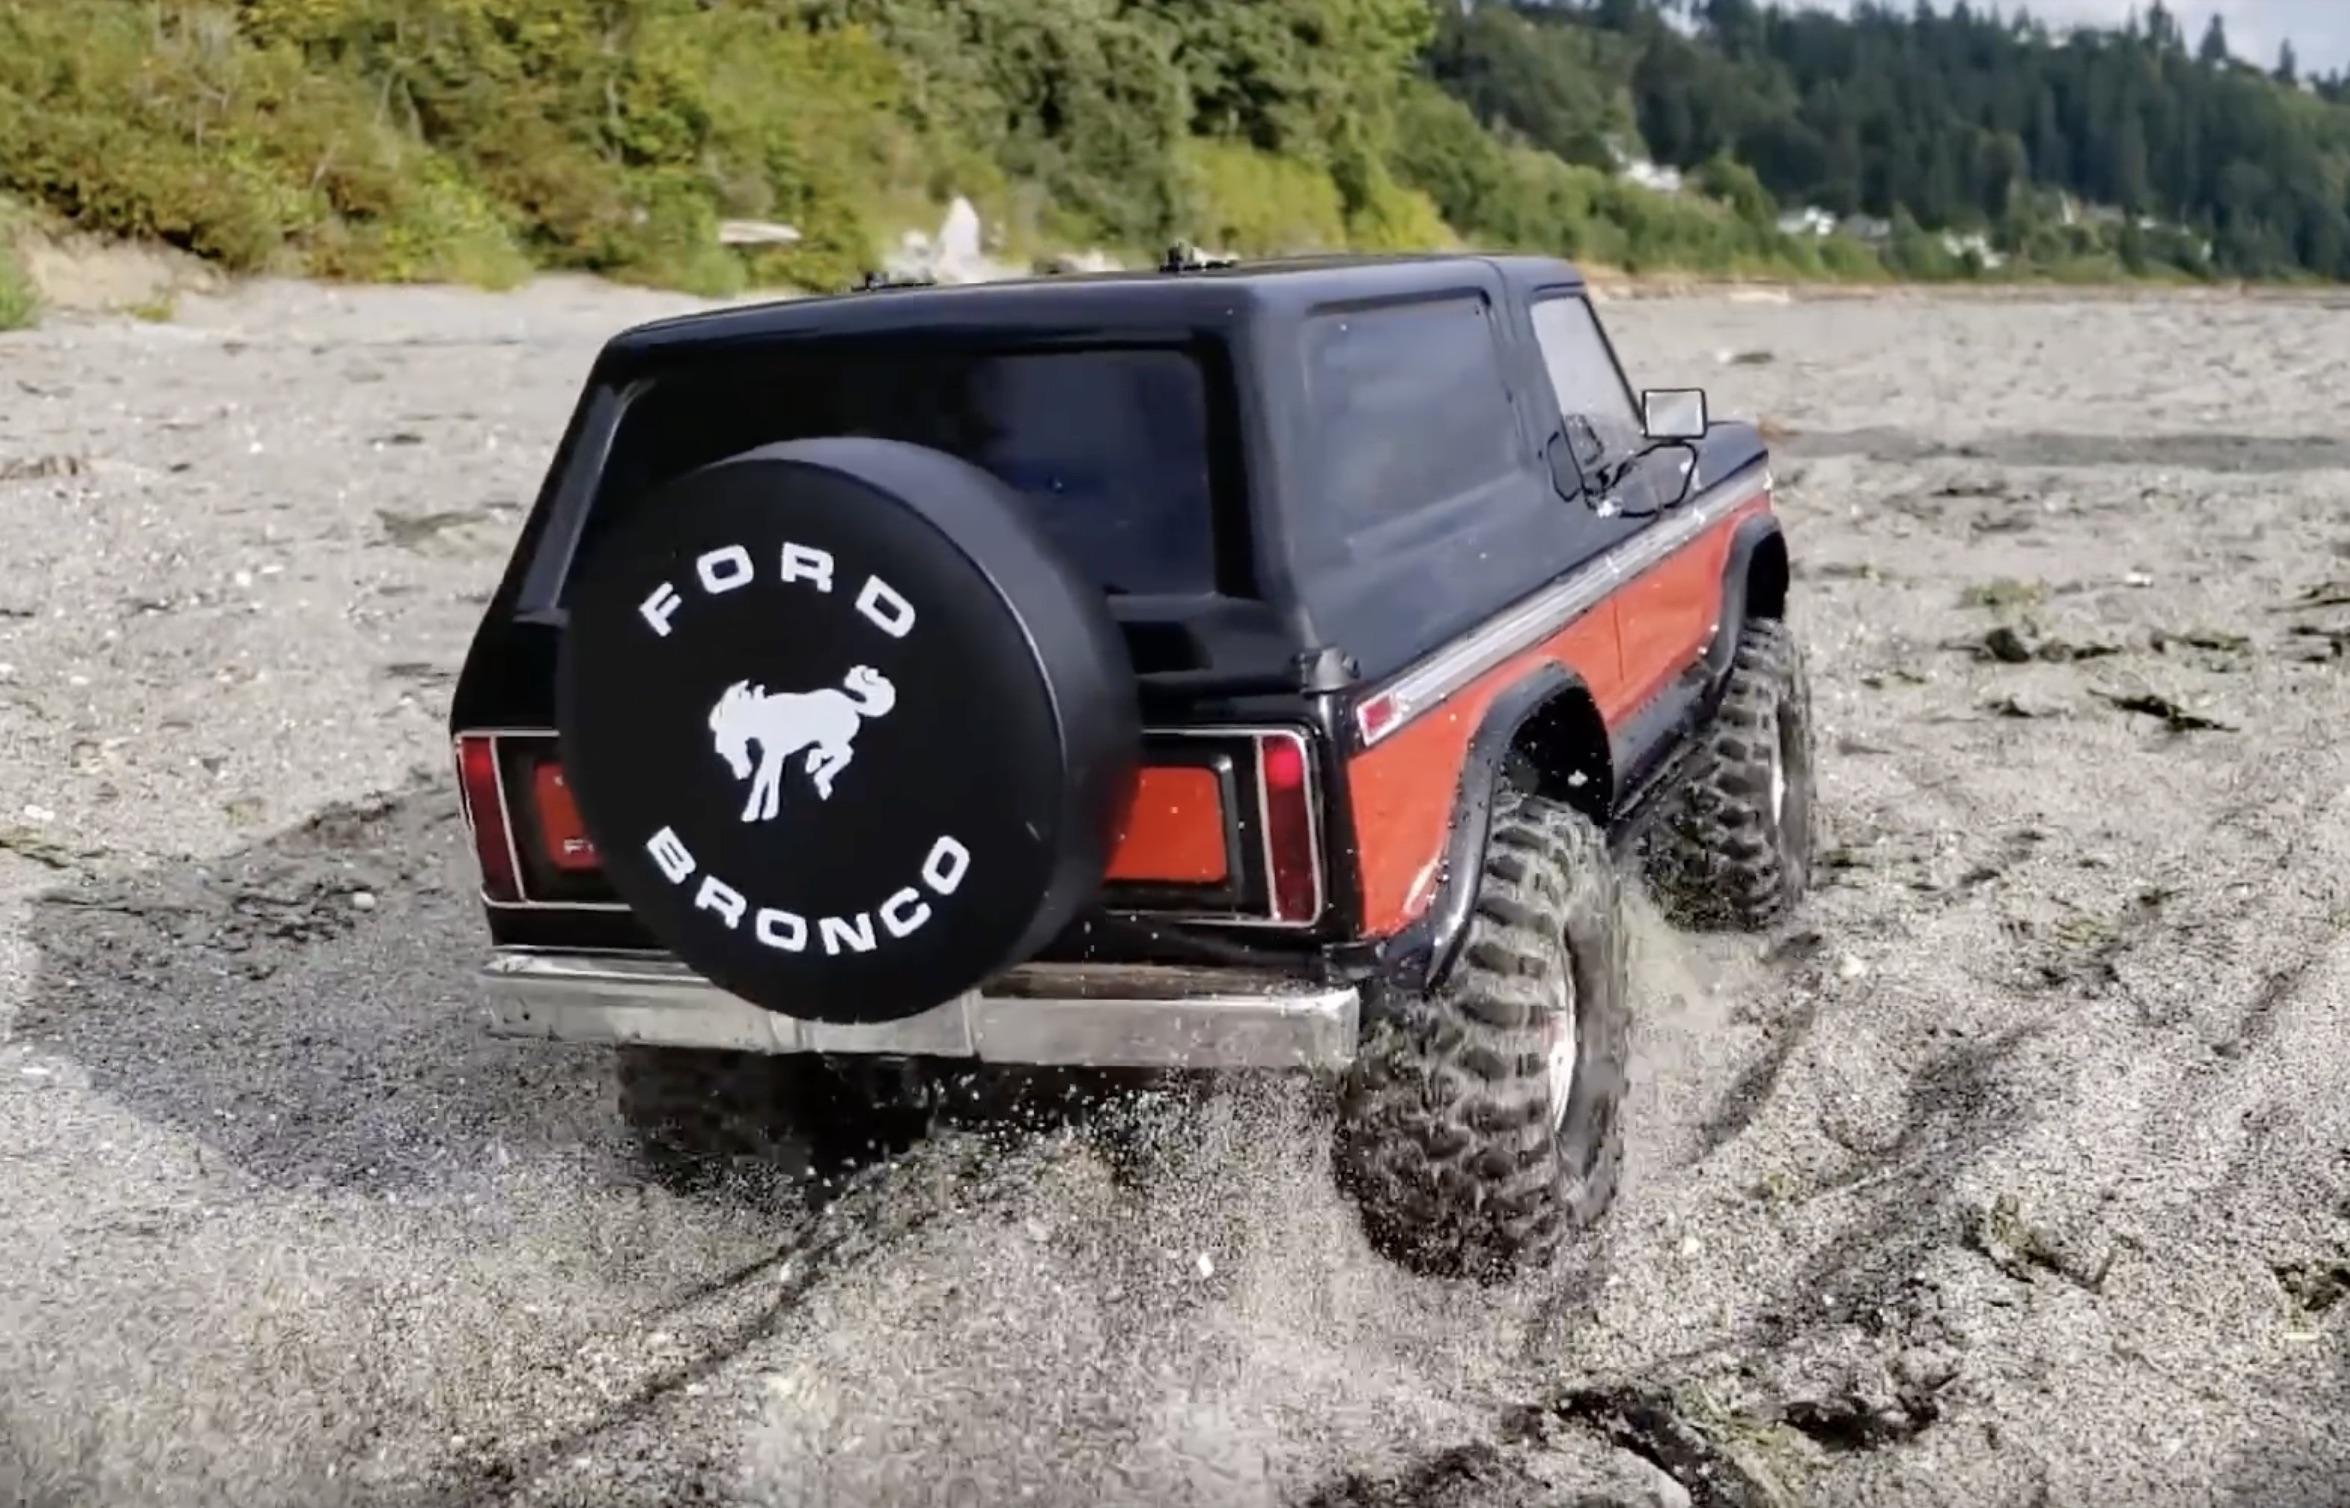 Your Moment Of Zen: A Traxxas Remote-Controlled Ford Bronco Romping On The Beach